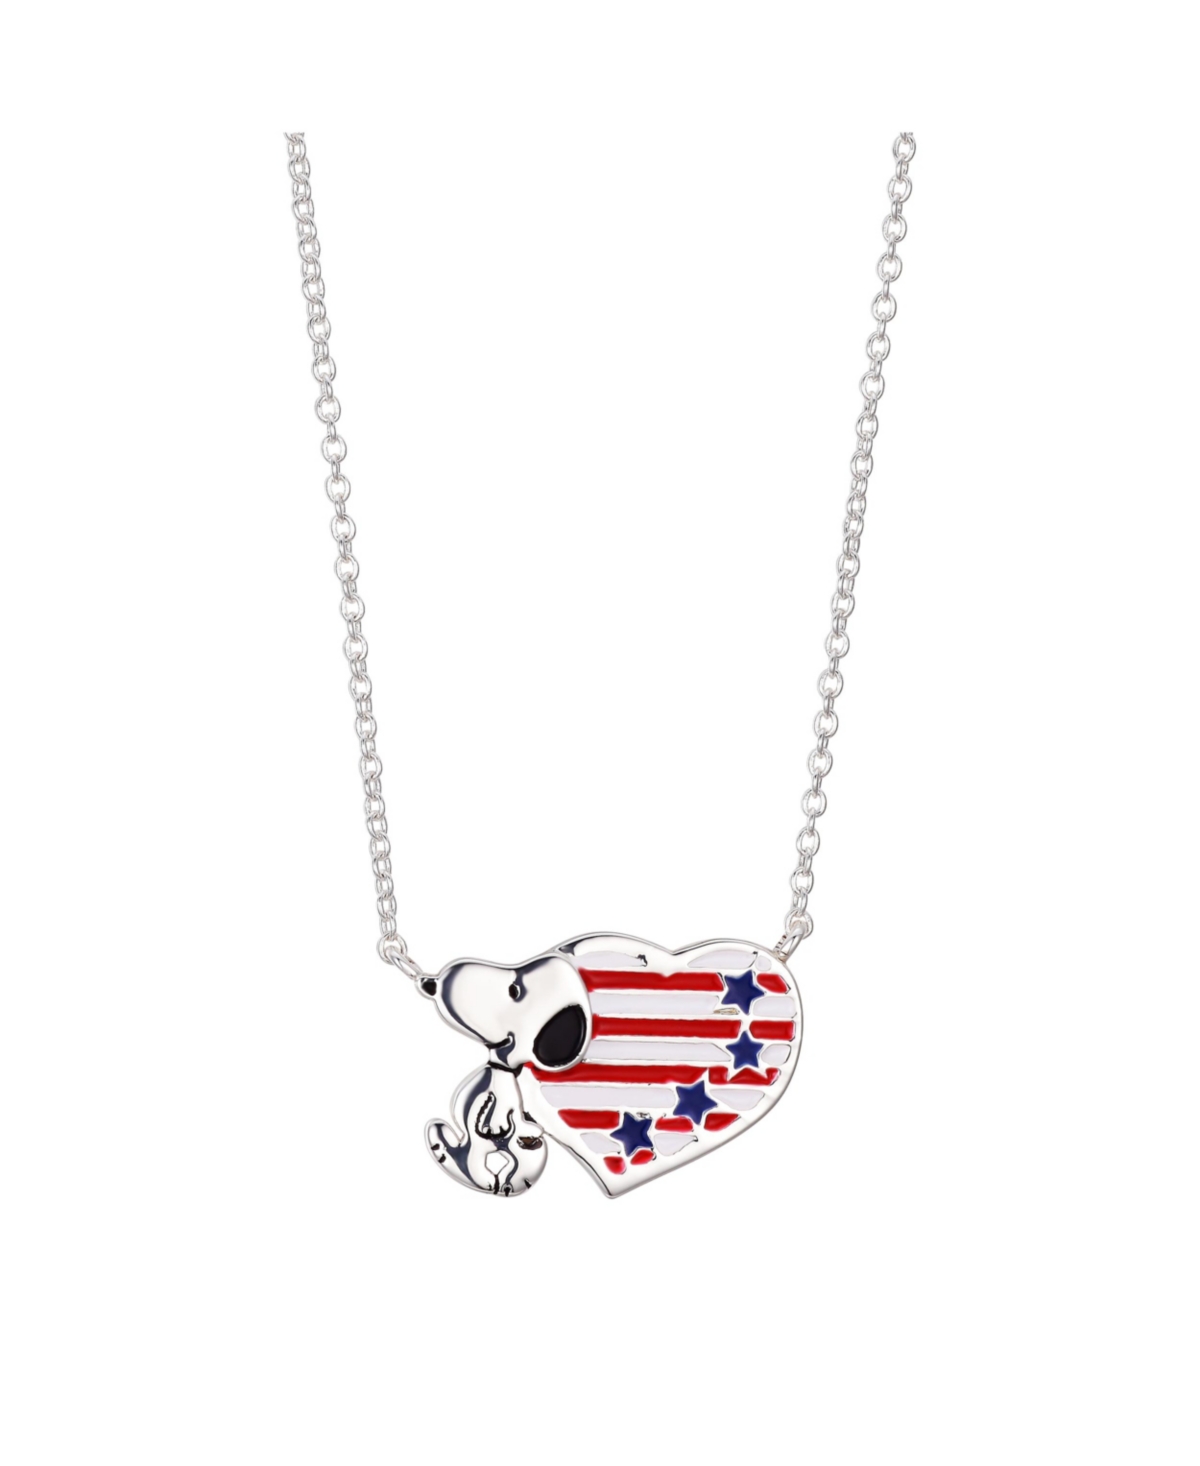 Silver Plated Peanuts "Snoopy" Americana Heart Pendant Necklace, 16"+2" for Unwritten - Silver